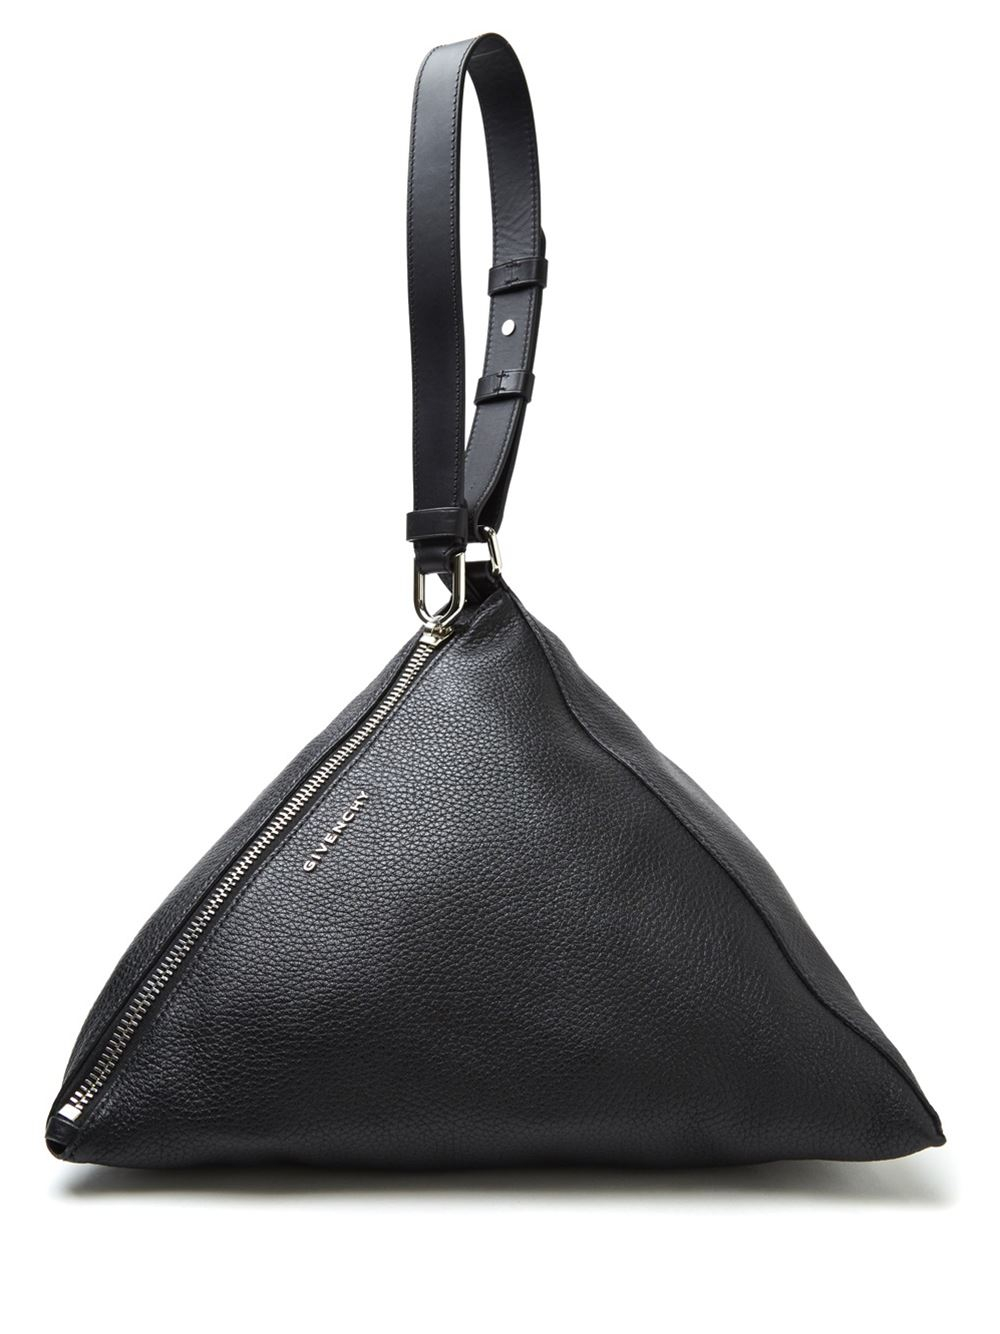 Givenchy Pyramid Pouch in Black - Lyst